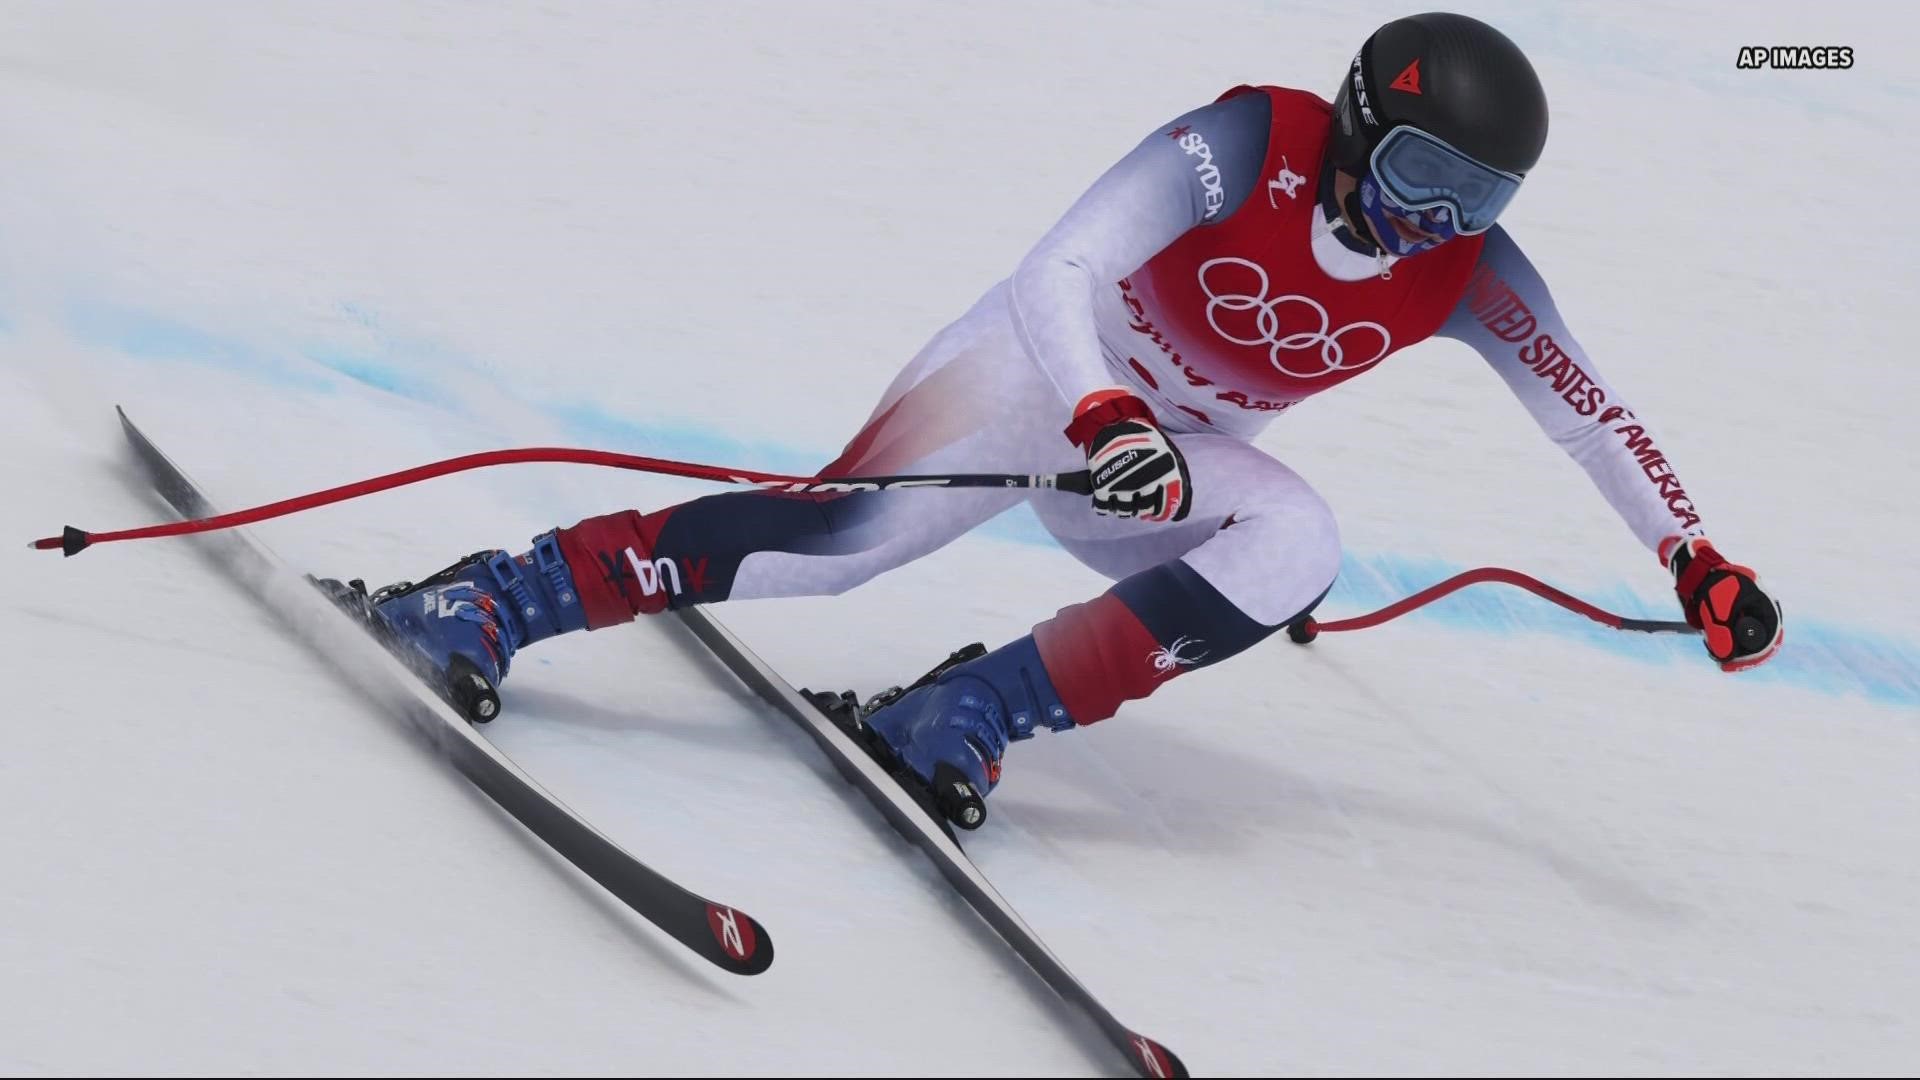 Portland skier Jackie Wiles finished 21st overall in downhill at the Winter Olympics in Beijing. It was her best finish ever in the Olympics.